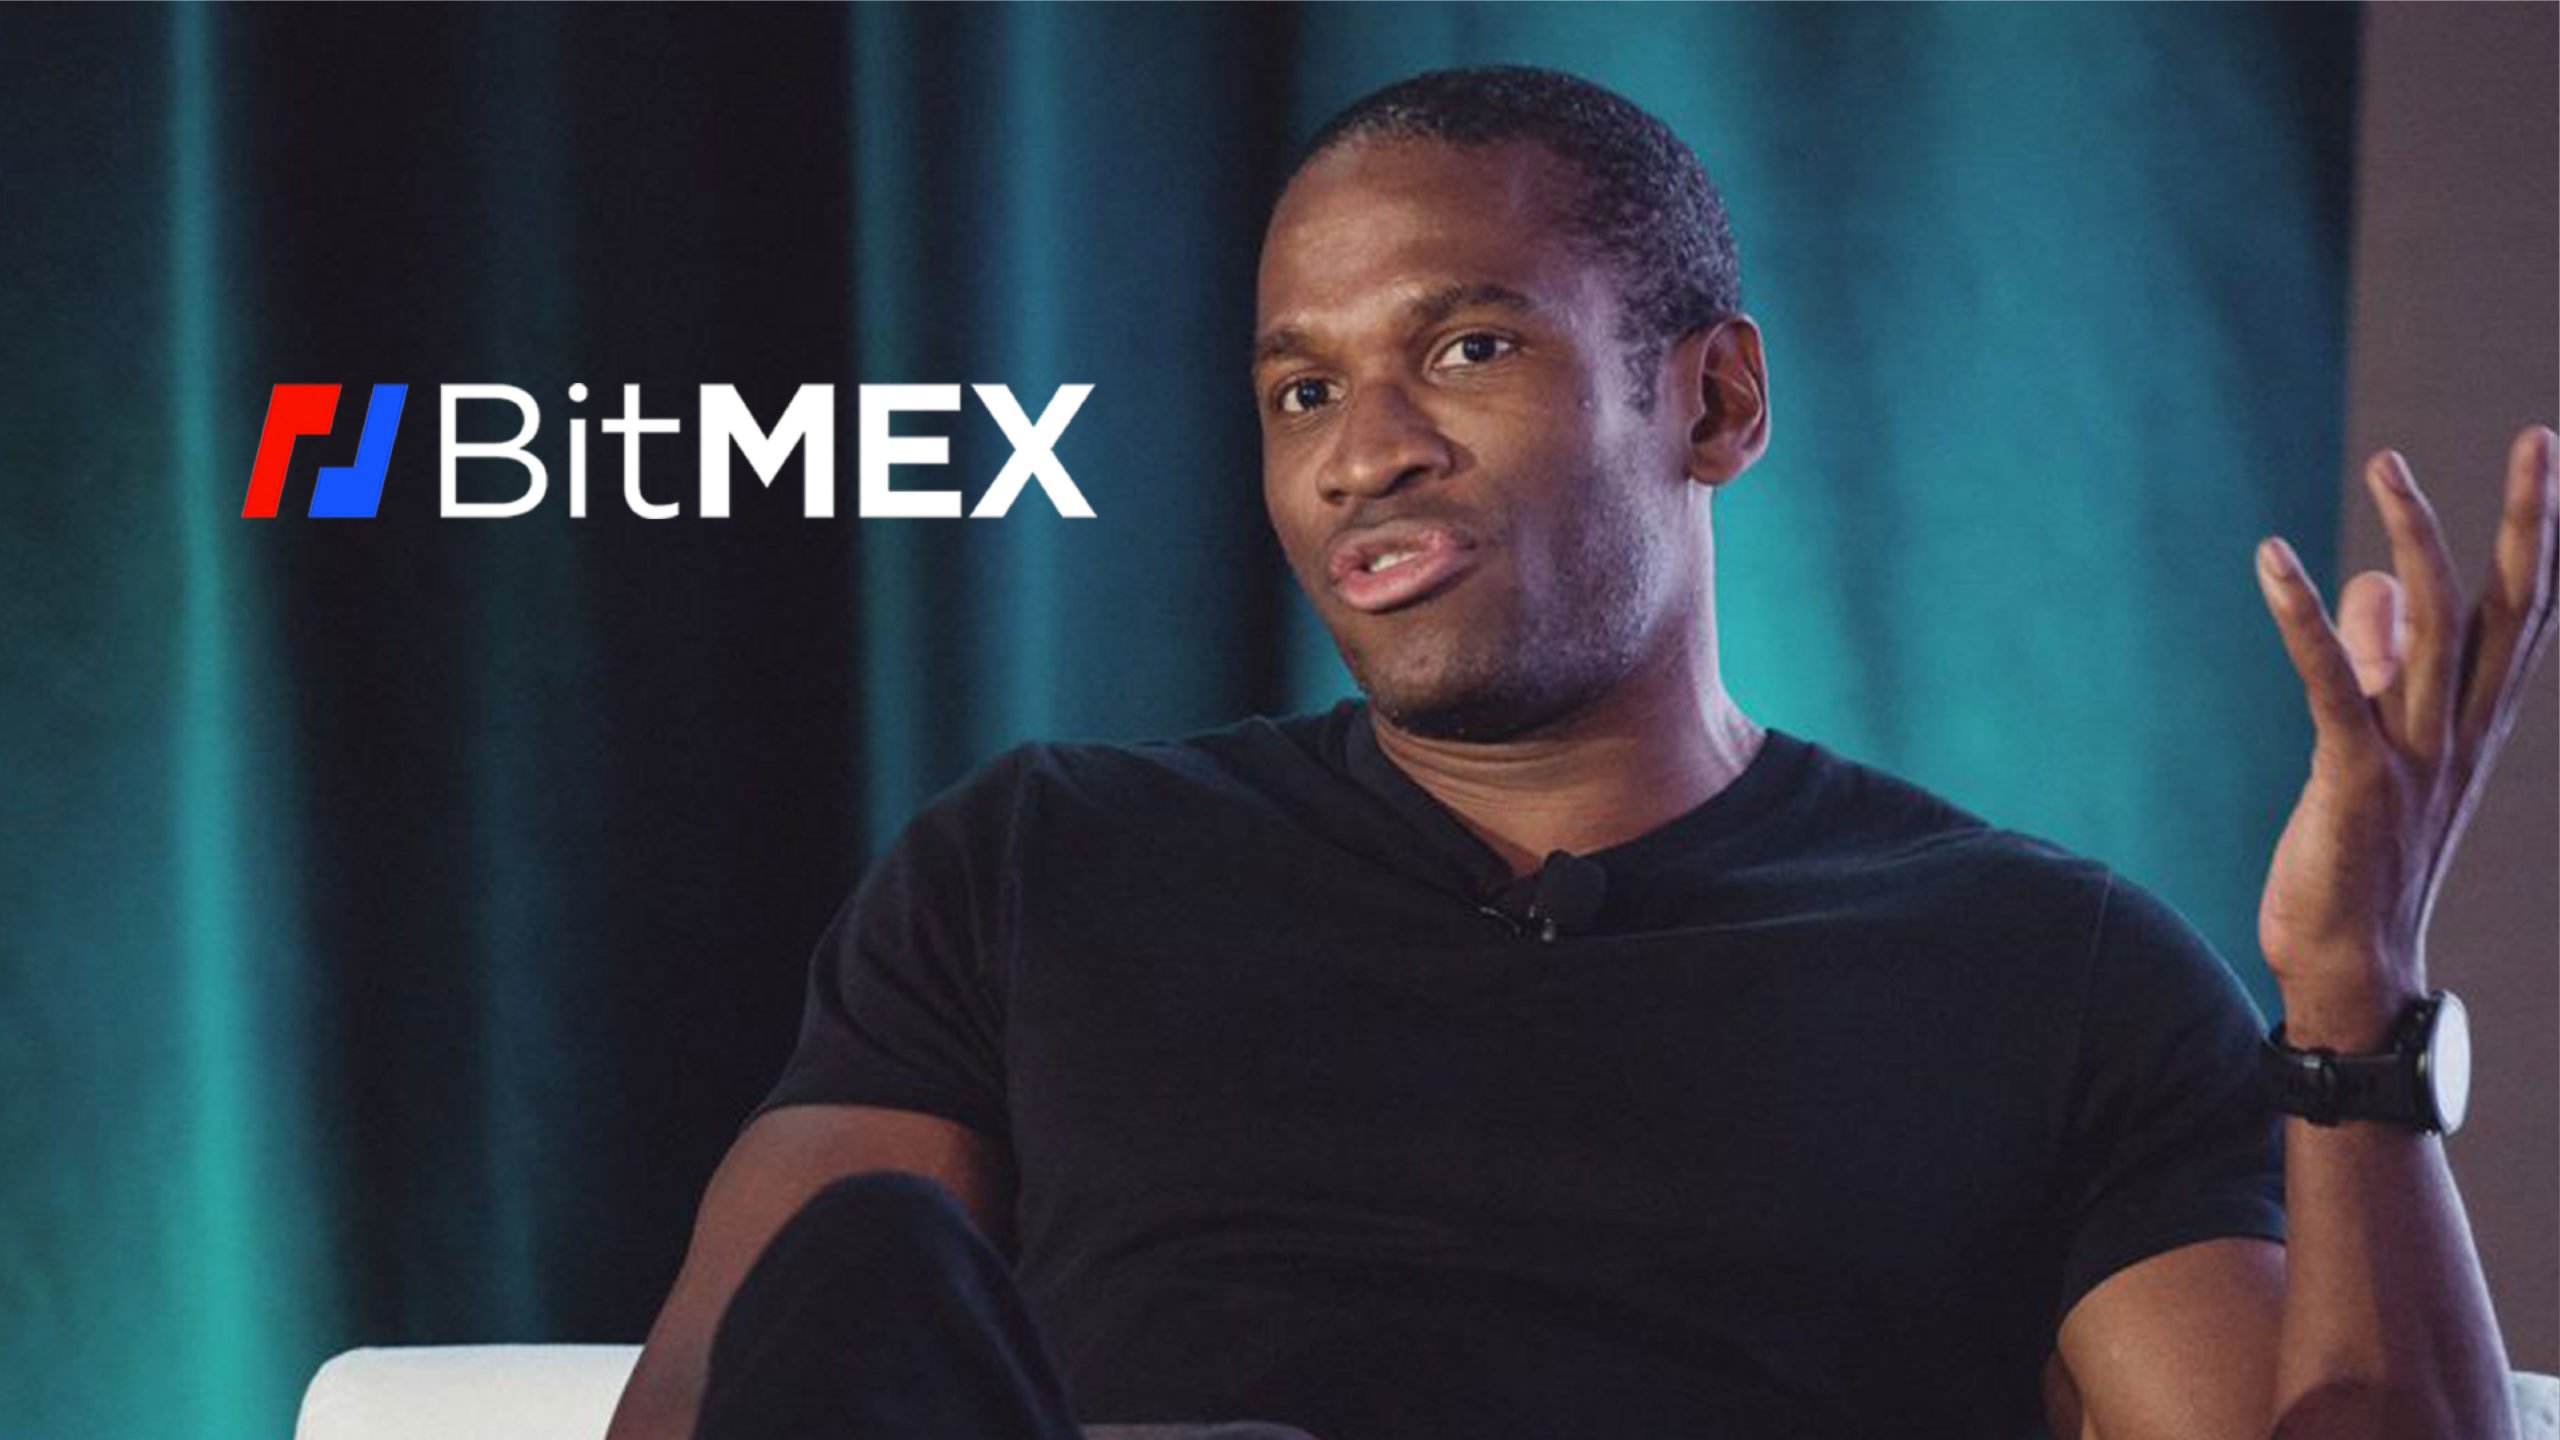 BitMEX CEO Arthur Hayes spoke about predictions made that there will be a major financial crisis in the next decade